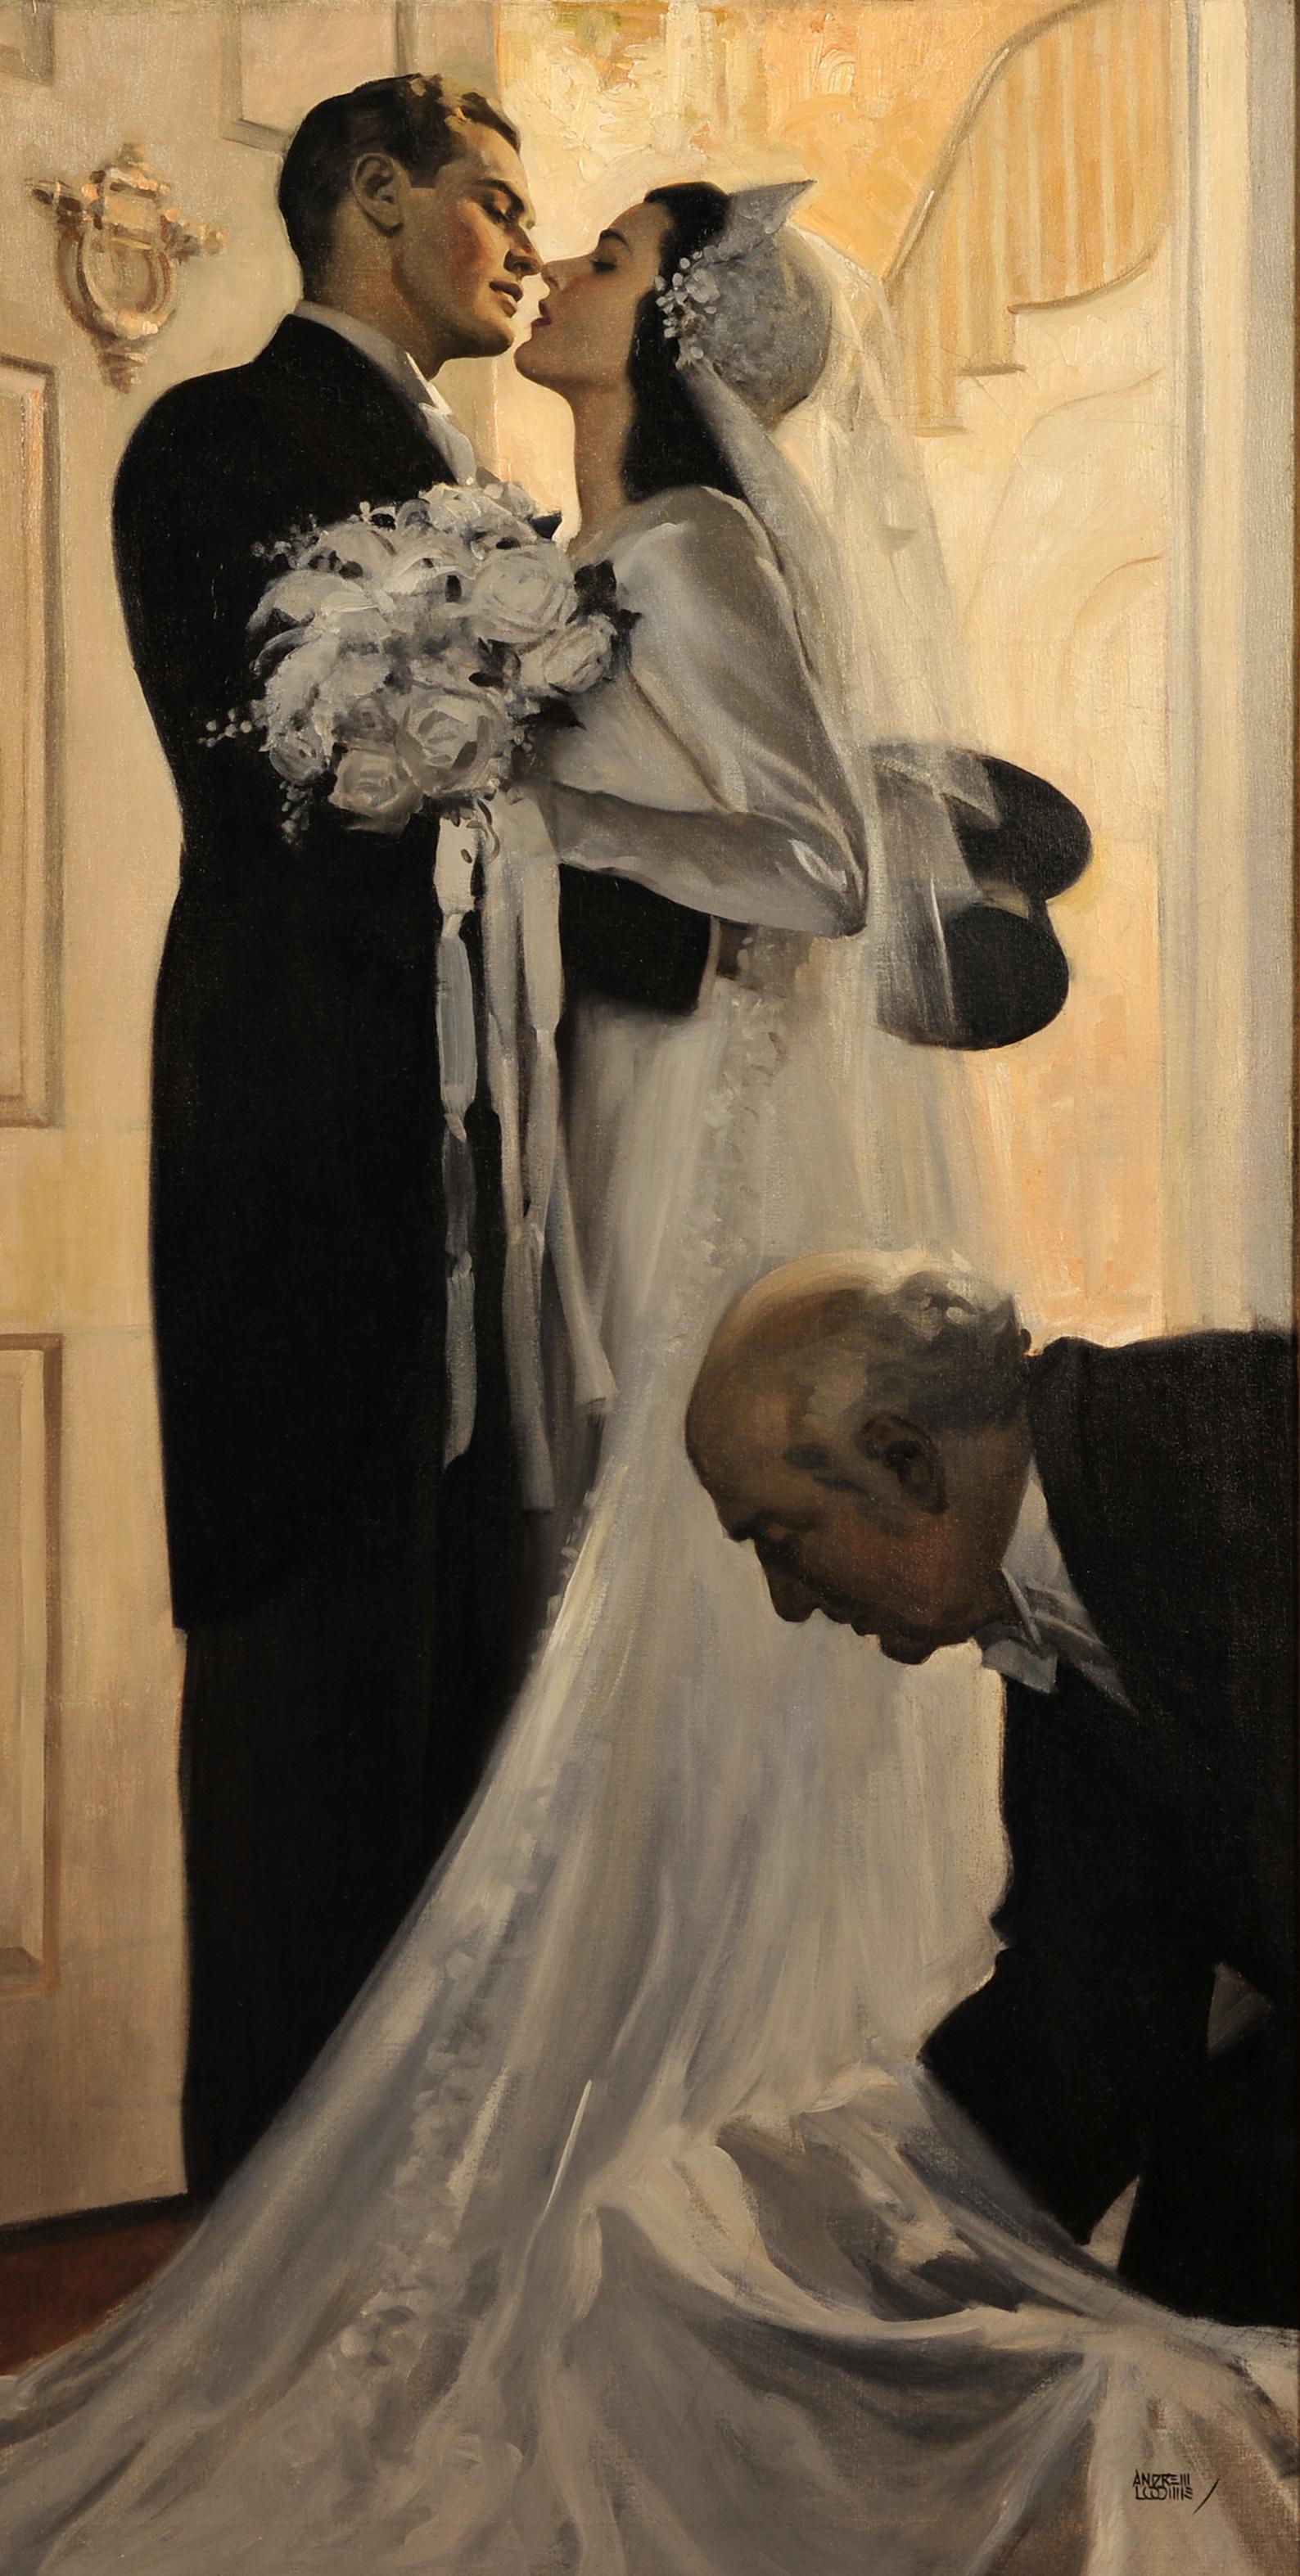 The Wedding - Painting by Andrew Loomis